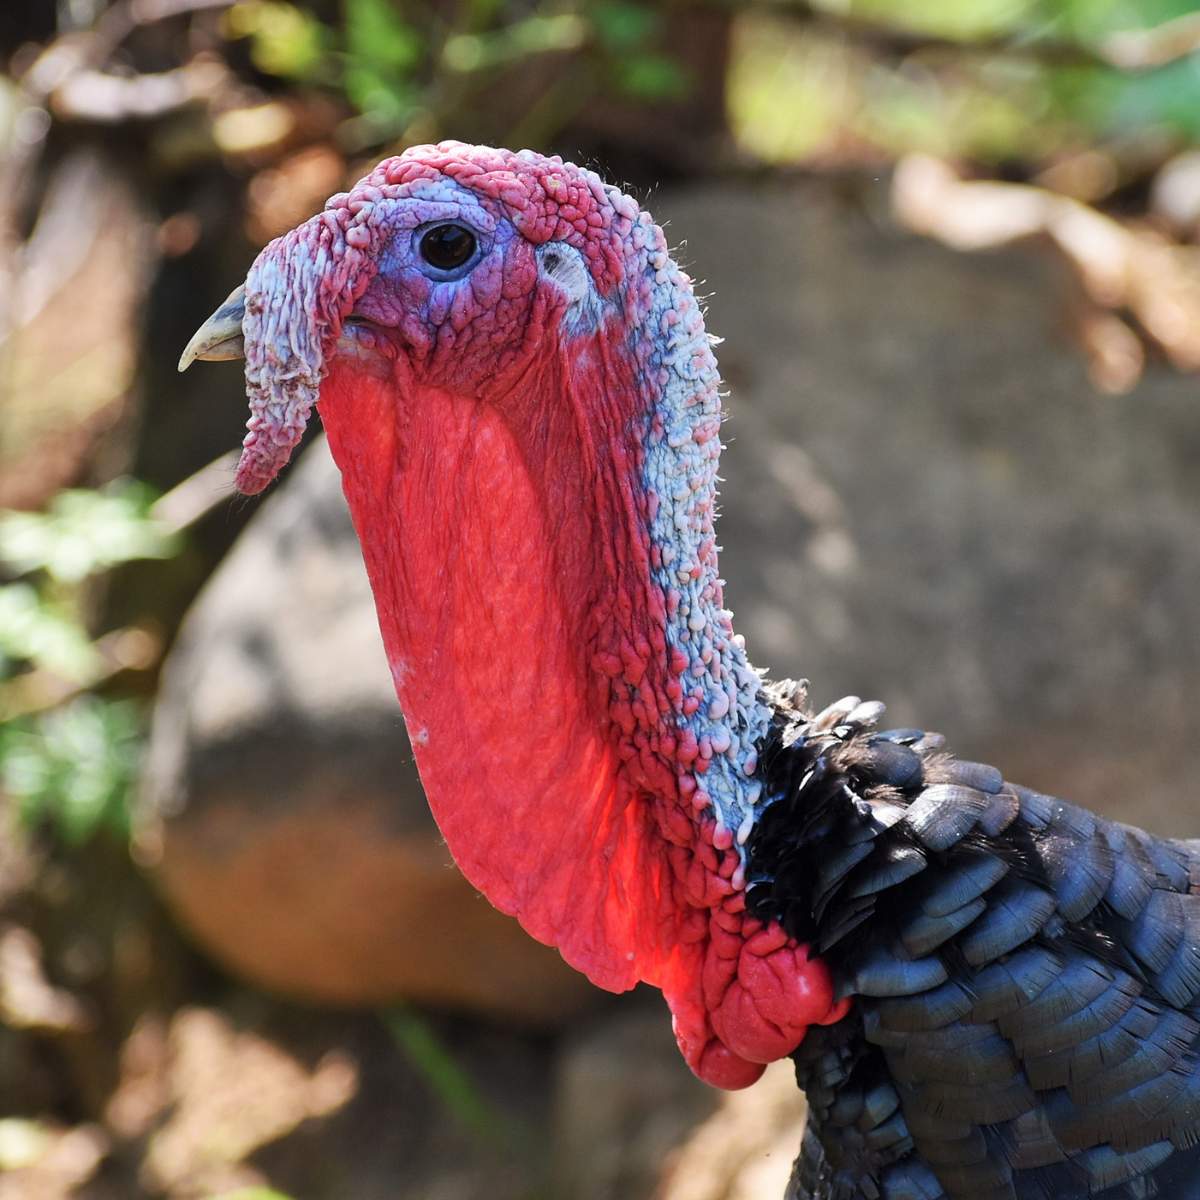 The face of a male turkey with a red snood hanging over his beak.